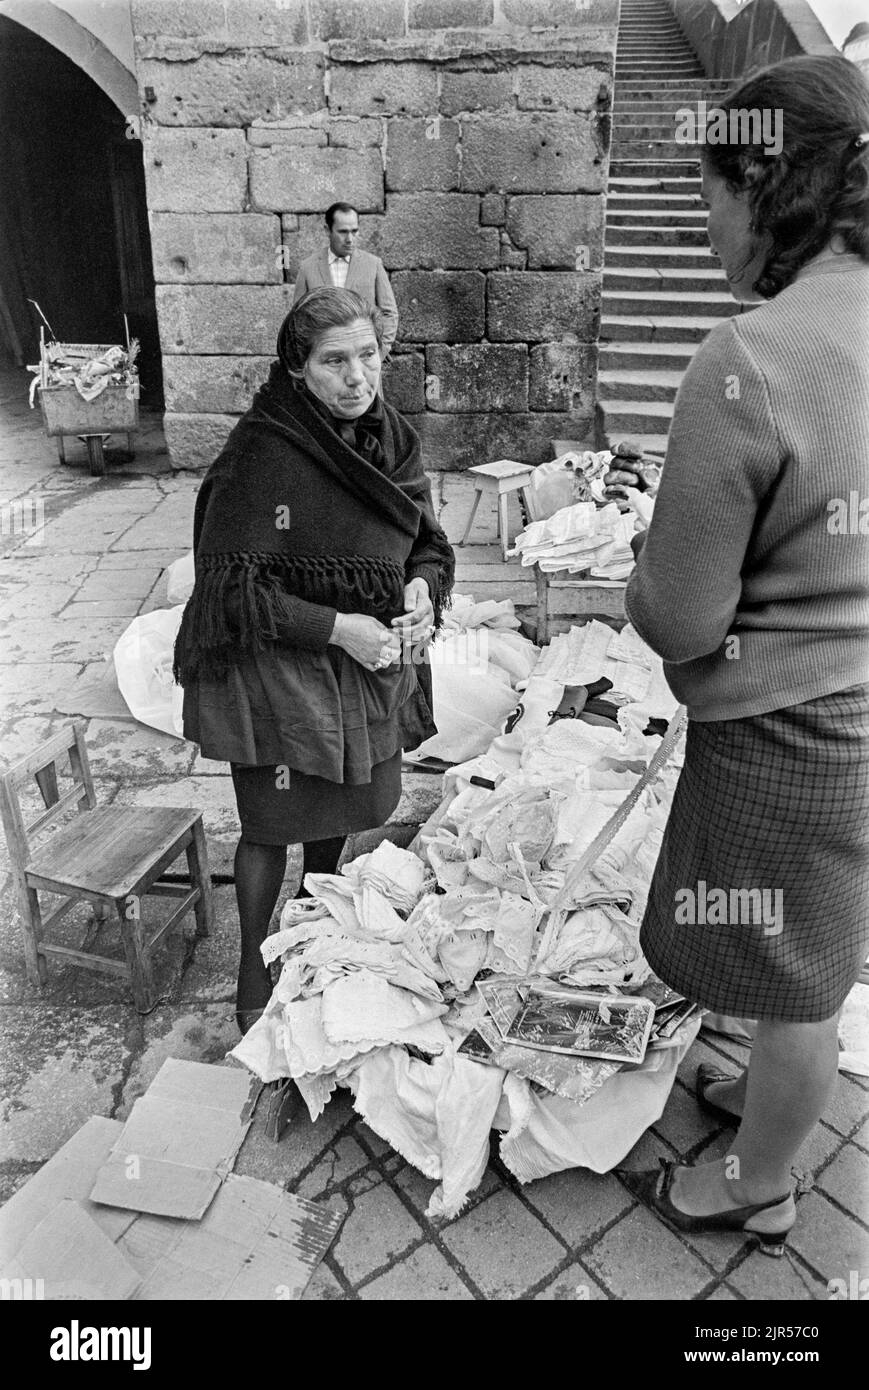 PORTUGAL - PORTO -  1970. Women selling lace and other items at a market by the river in the Ribeira district of Porto, Northern Portugal.  Copyright Stock Photo